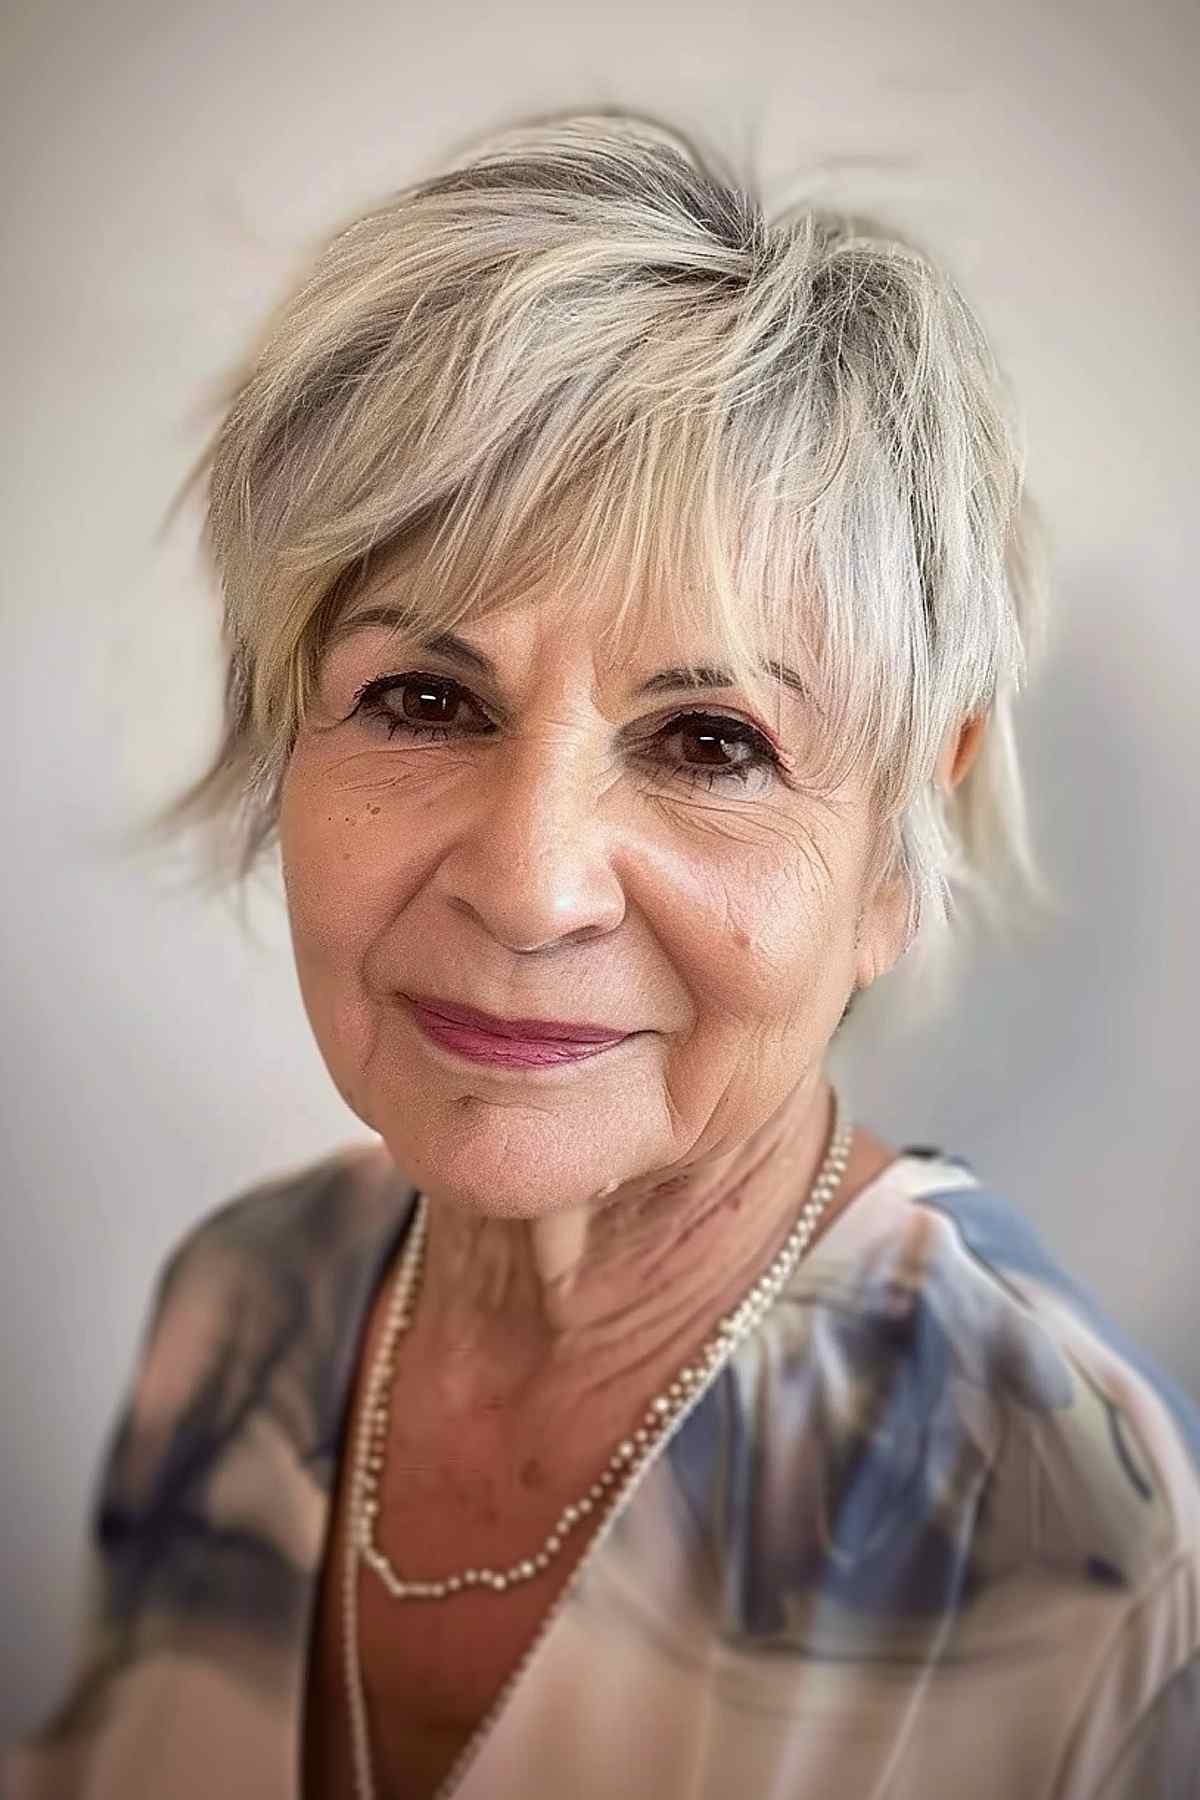 Graceful elf style for women over 70 with natural gray hair and soft, wispy layers.